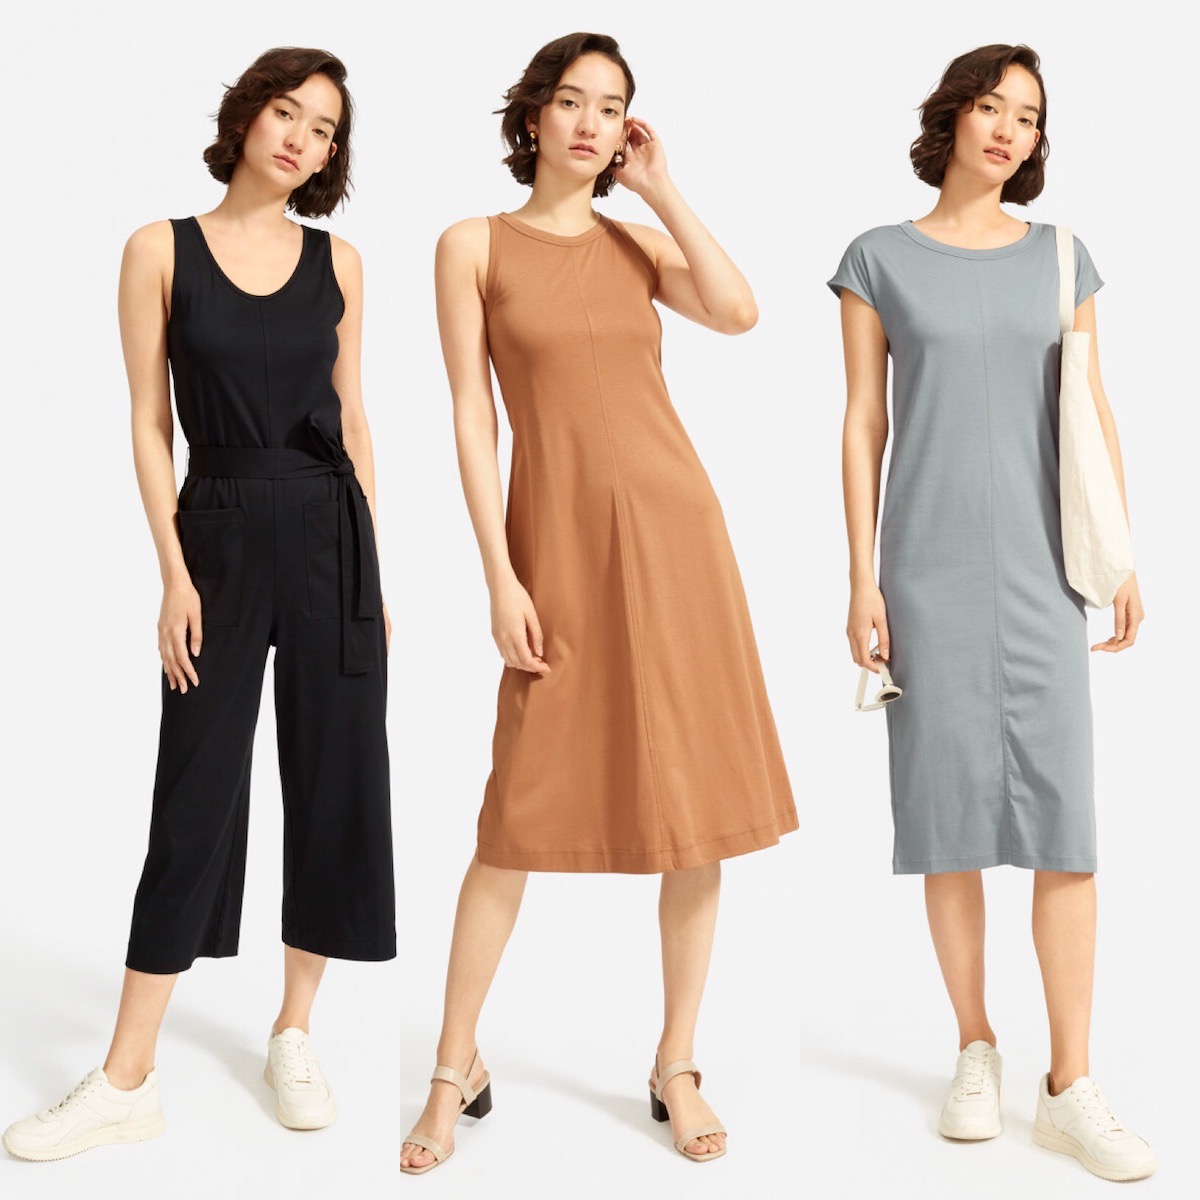 Everlane luxe cotton dresses review. The same model wears three different items: a jumpsuit and two dresses.